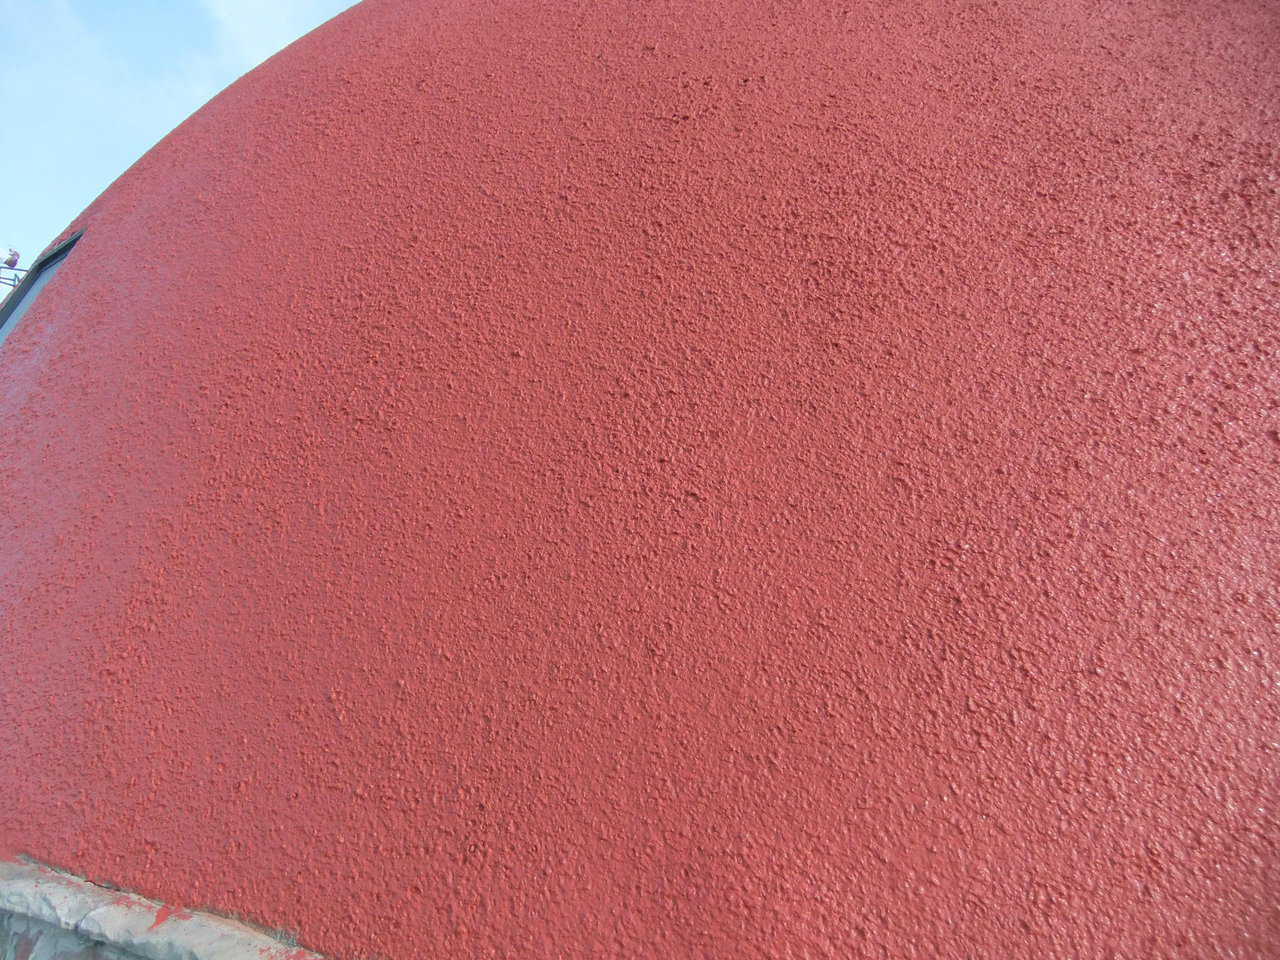 The silicon paint makes a great looking surface, that has a long life, stays clean and protects the concrete stucco.